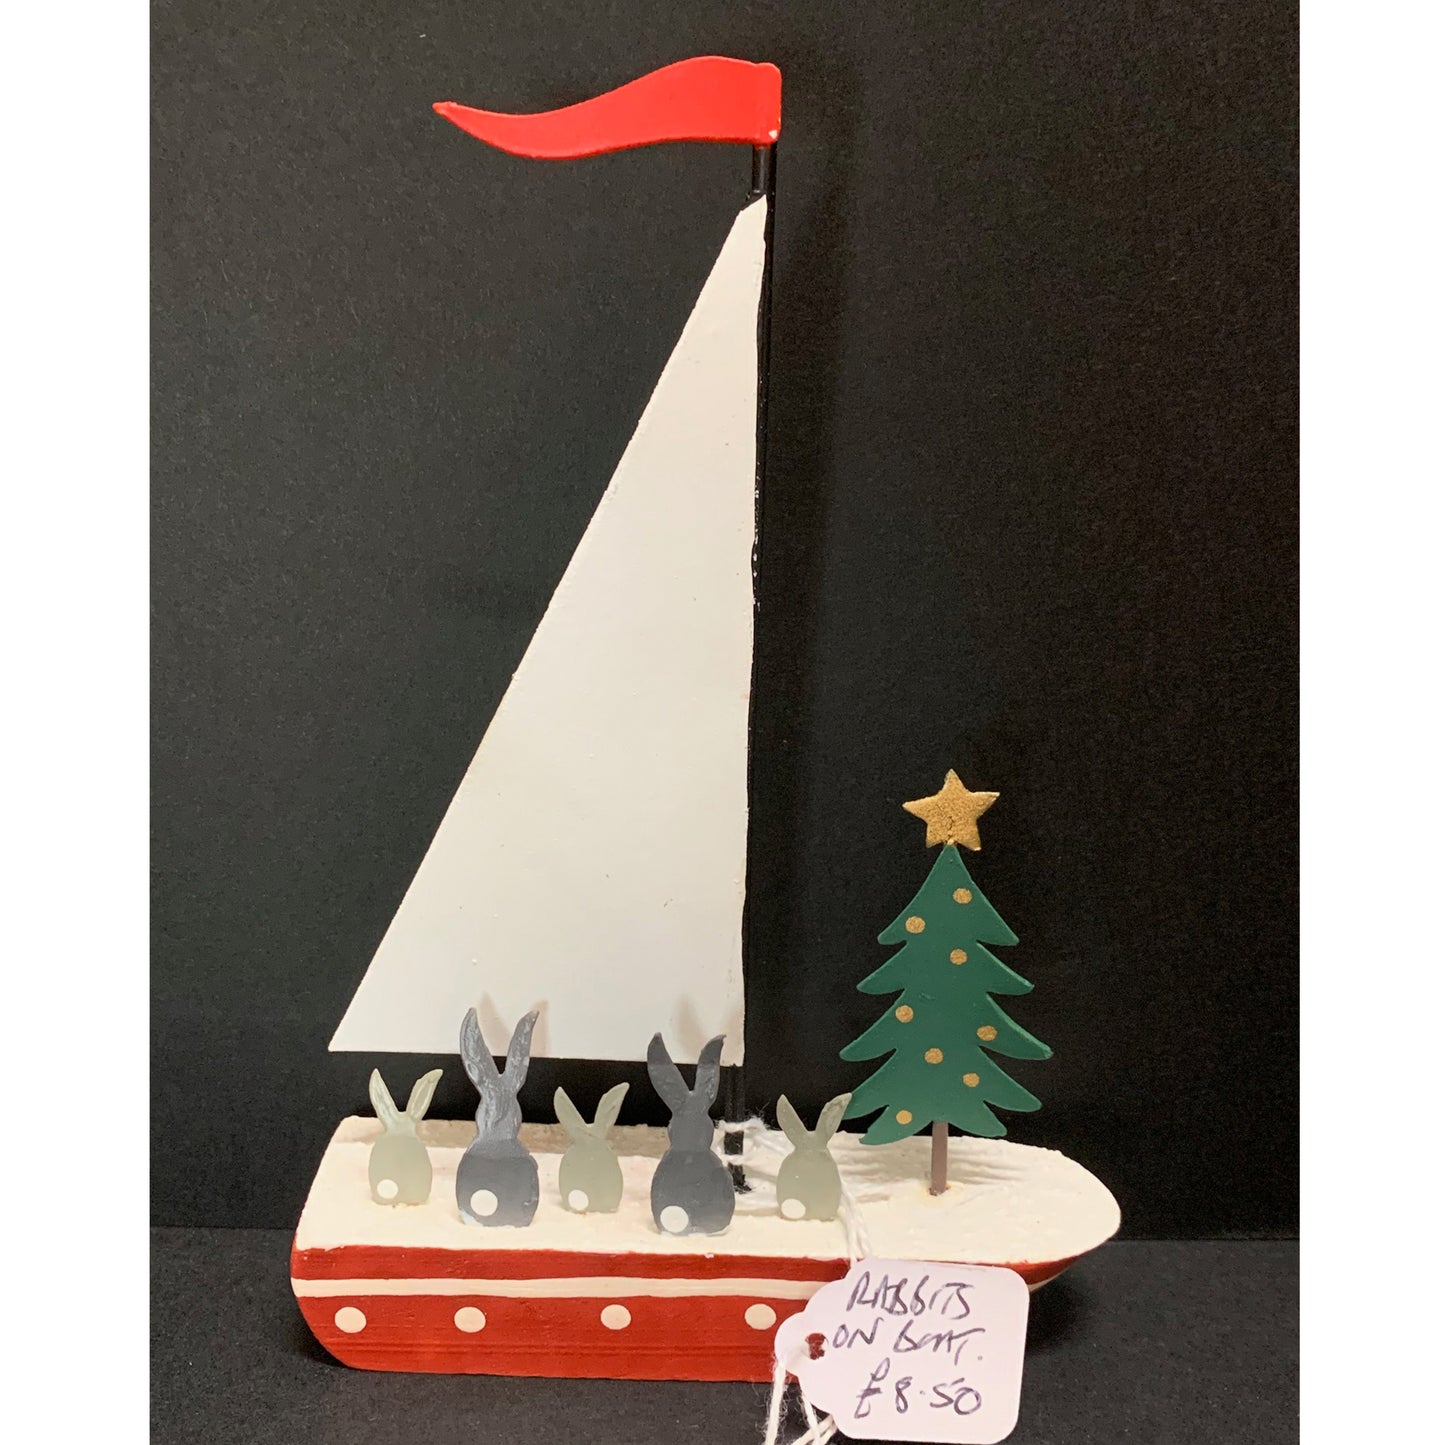 Rabbits on a Boat: Christmas Decoration on a Black Background | Happy Piranha